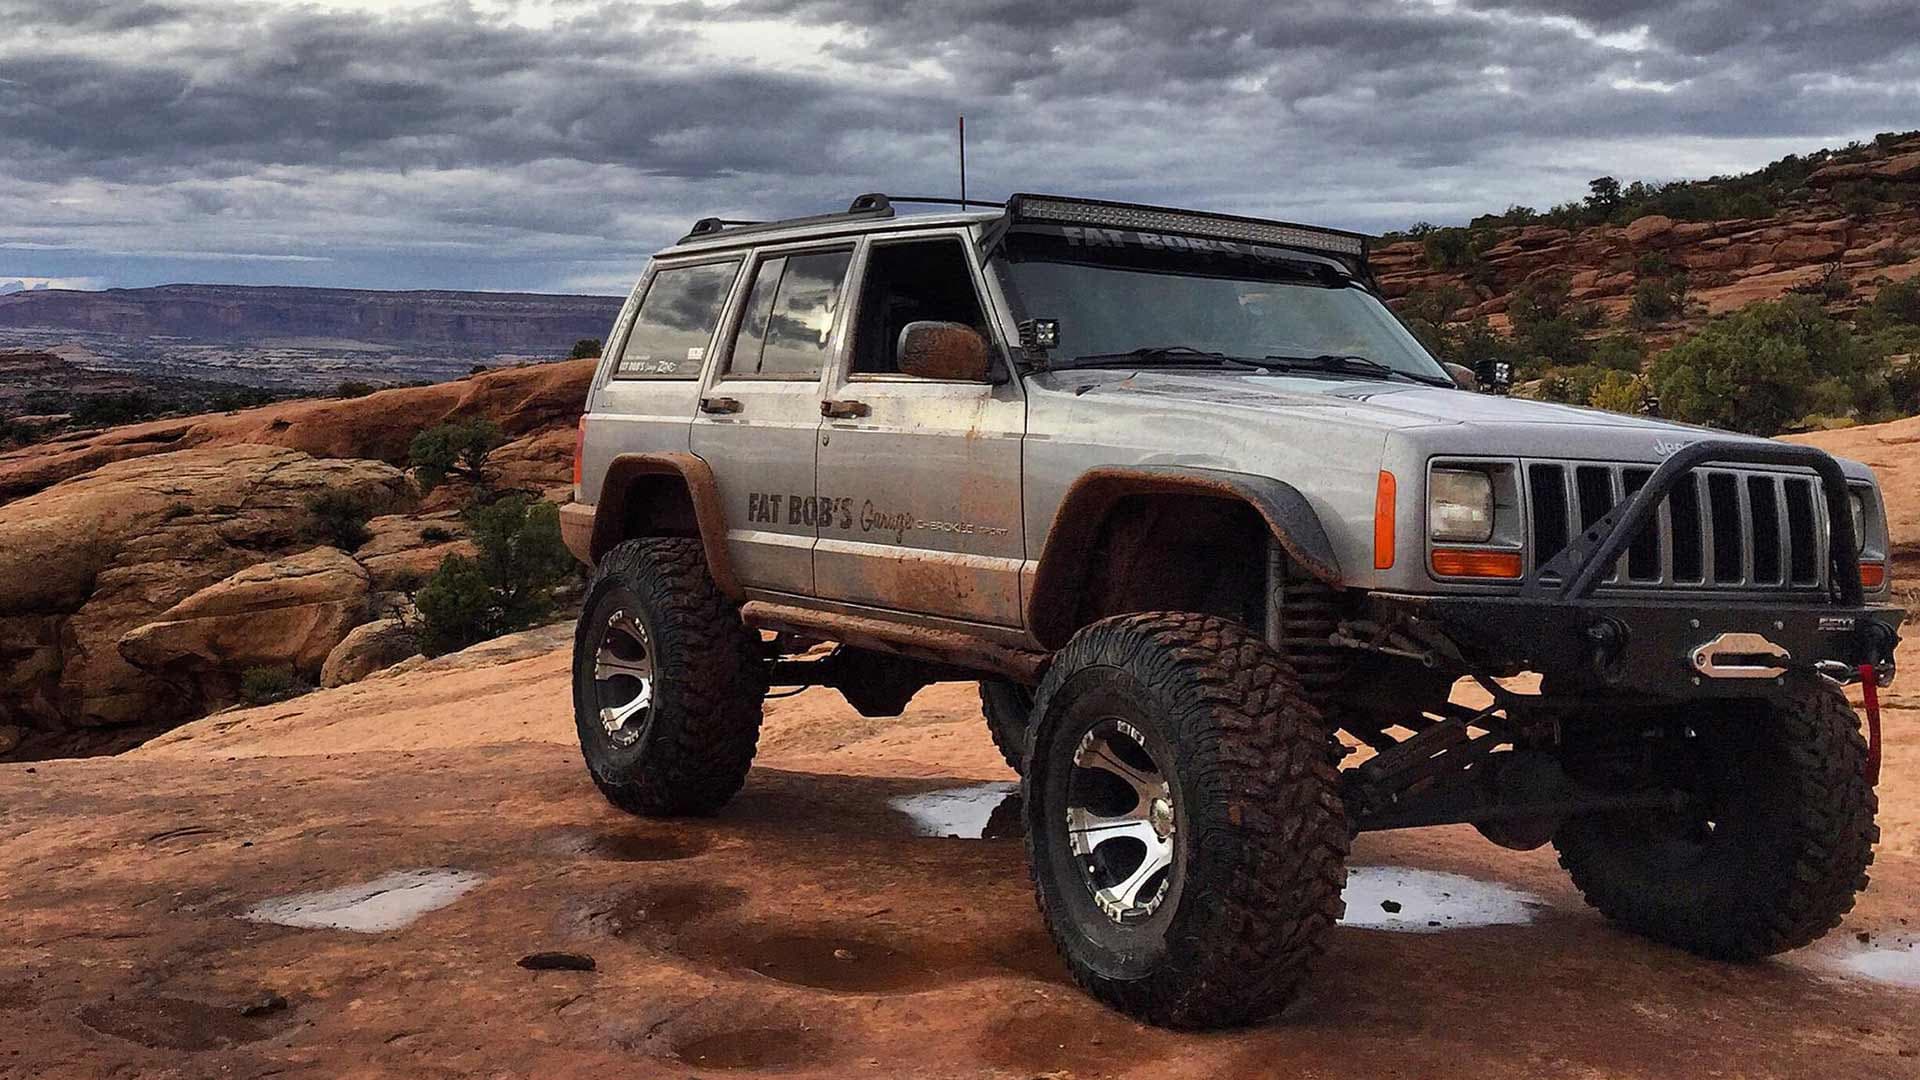 Watch This Jeep Cherokee Climb Up a Nearly Vertical Rock Face Easy As Pie